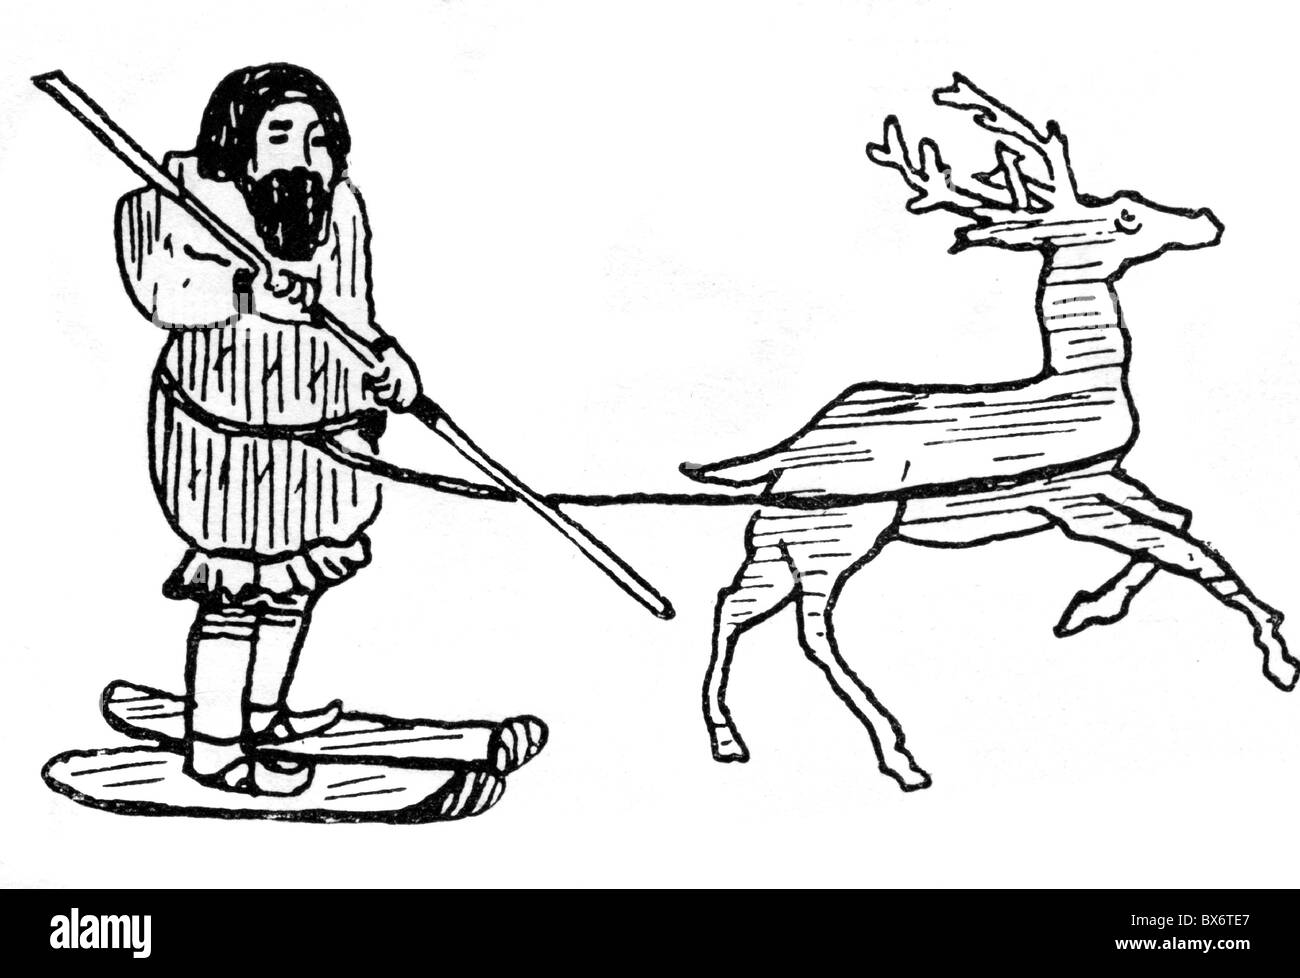 sports, winter sports, Nordic ski, Aino on ski, with reindeer as team, illustration, 18th century, historic, historical,ski, skis, snow shoe, snowshoe, snow shoes, snowshoes, clipping, cut out, cut-out, cut-outs, people, Additional-Rights-Clearences-Not Available Stock Photo